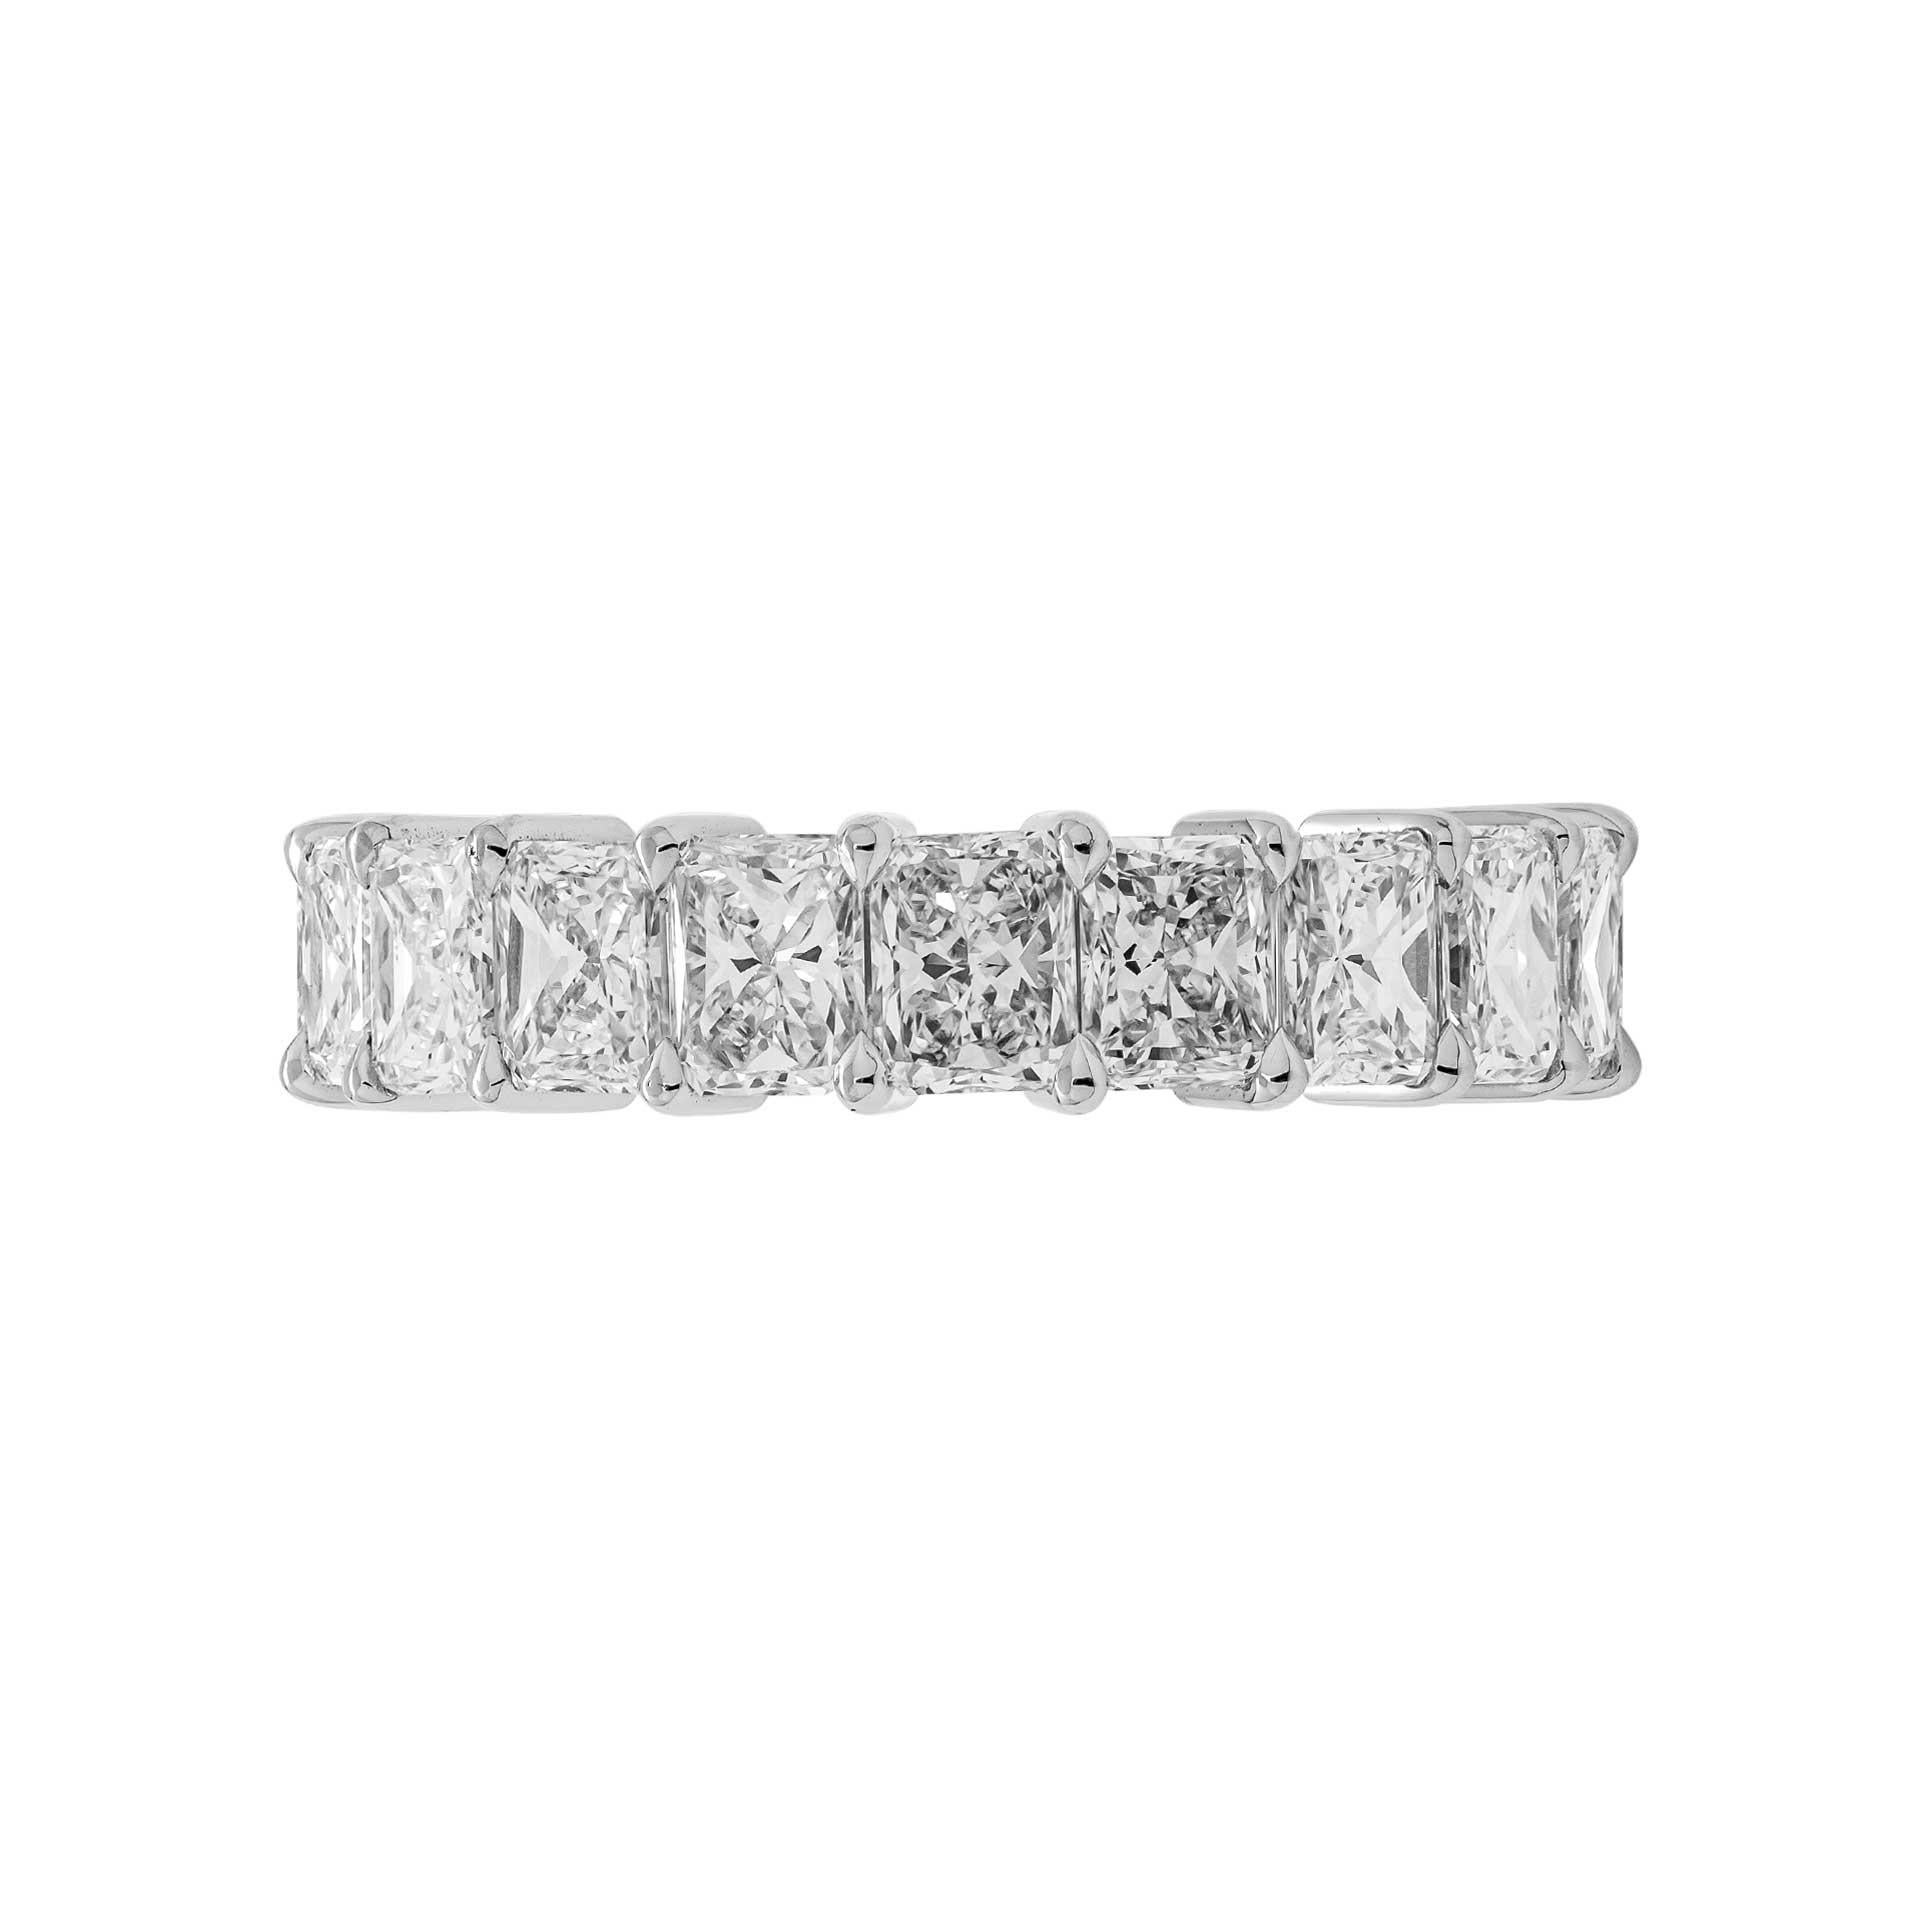 Radiant Cut Anniversary band in PT950;
Total Carat Weight: 6.60ct (0.33ct each, 20 stones)
 F-G color VS-VVS clarity 
Size: 6
Retail value: 38,000$
